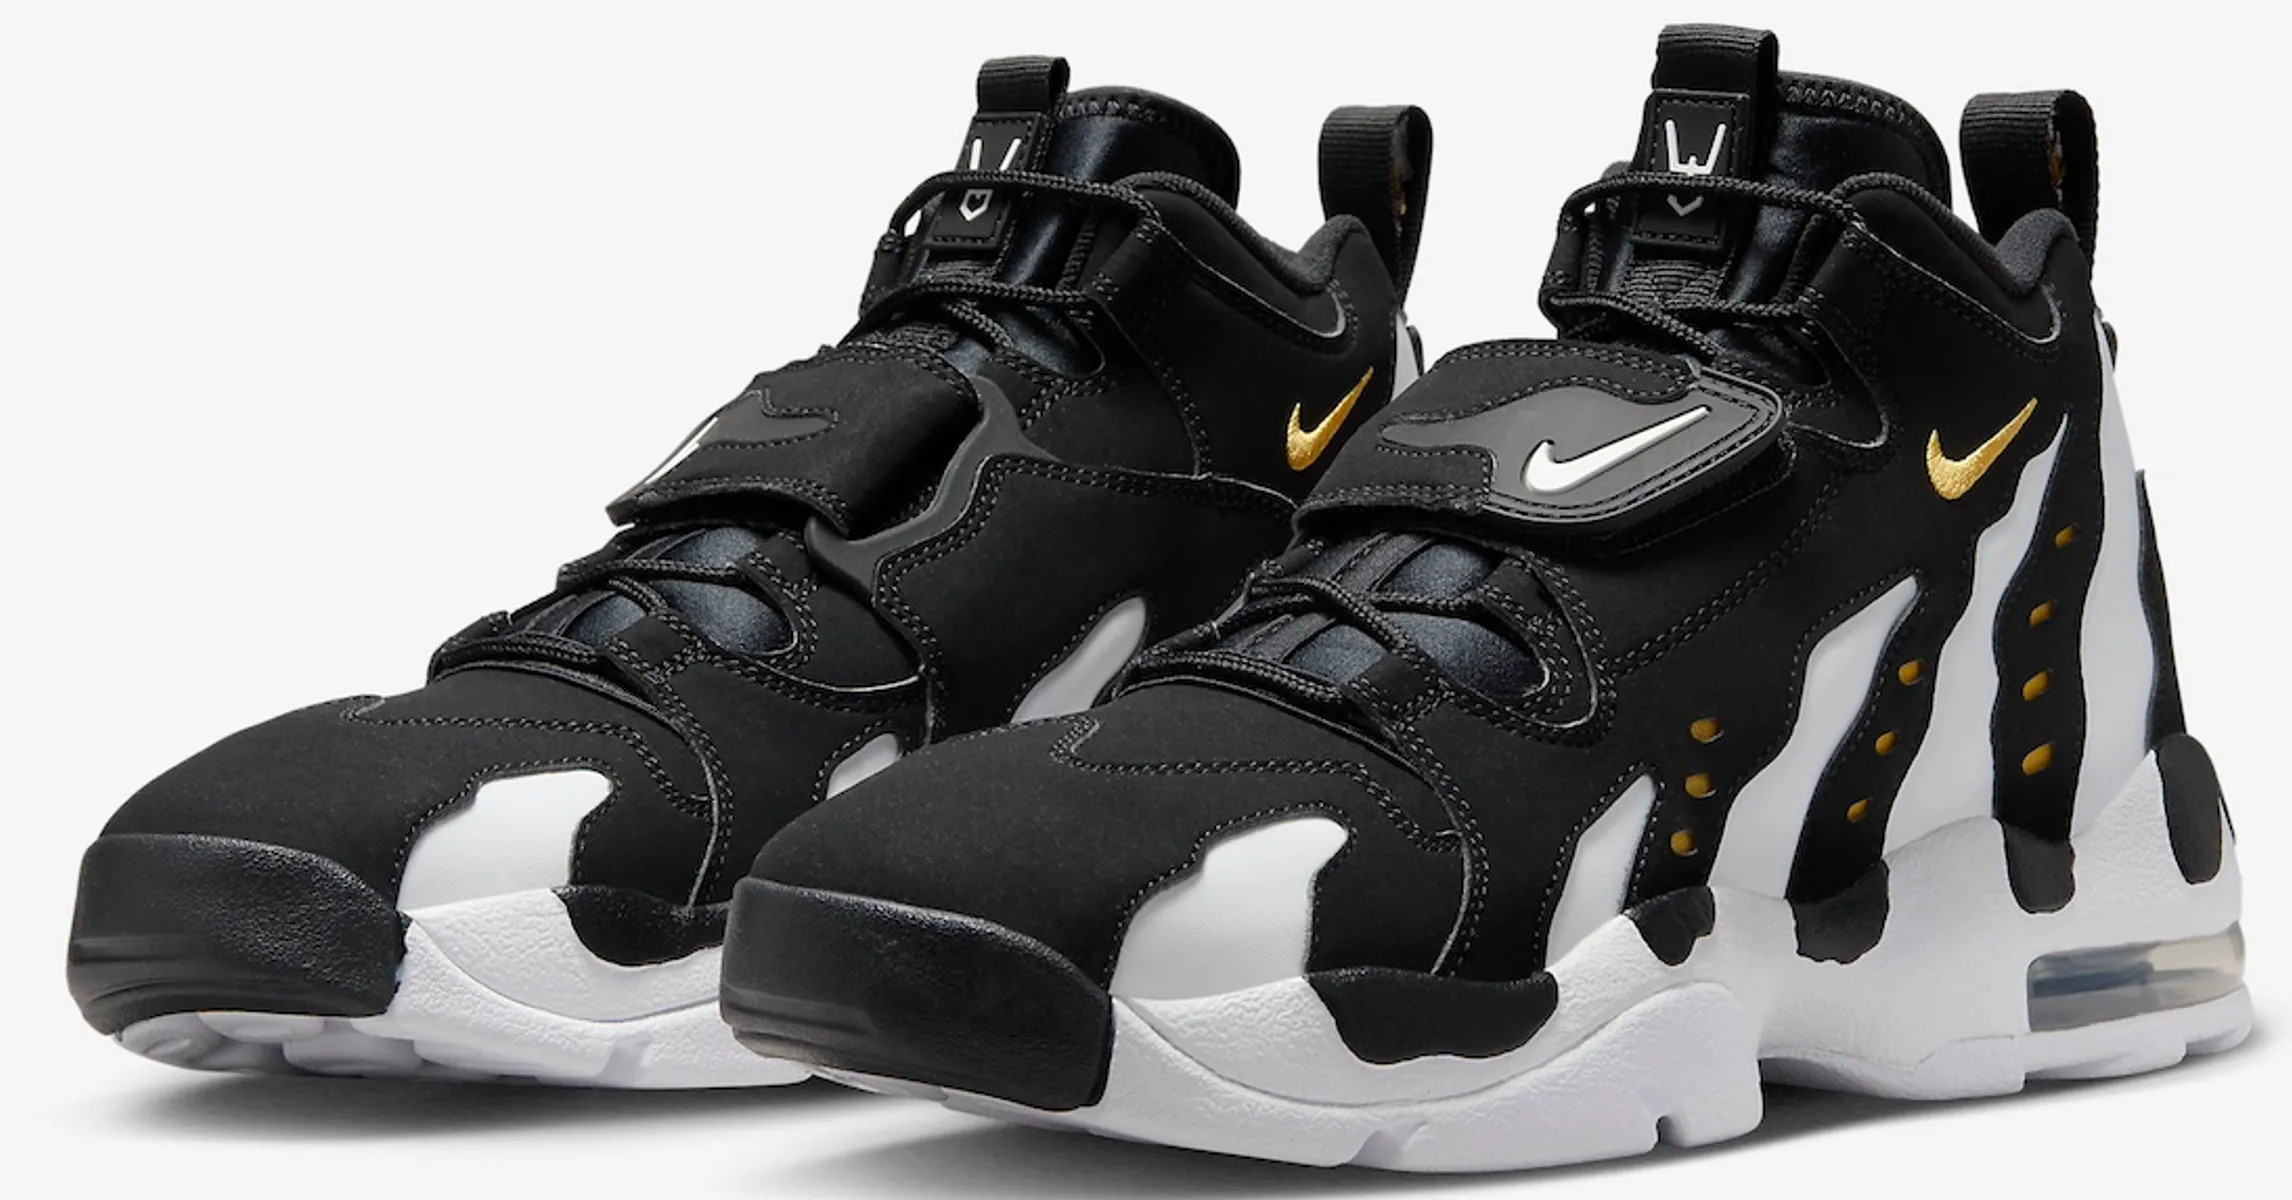 Nike Air DT Max '96 “Black/Varsity Maize” Just Dropped